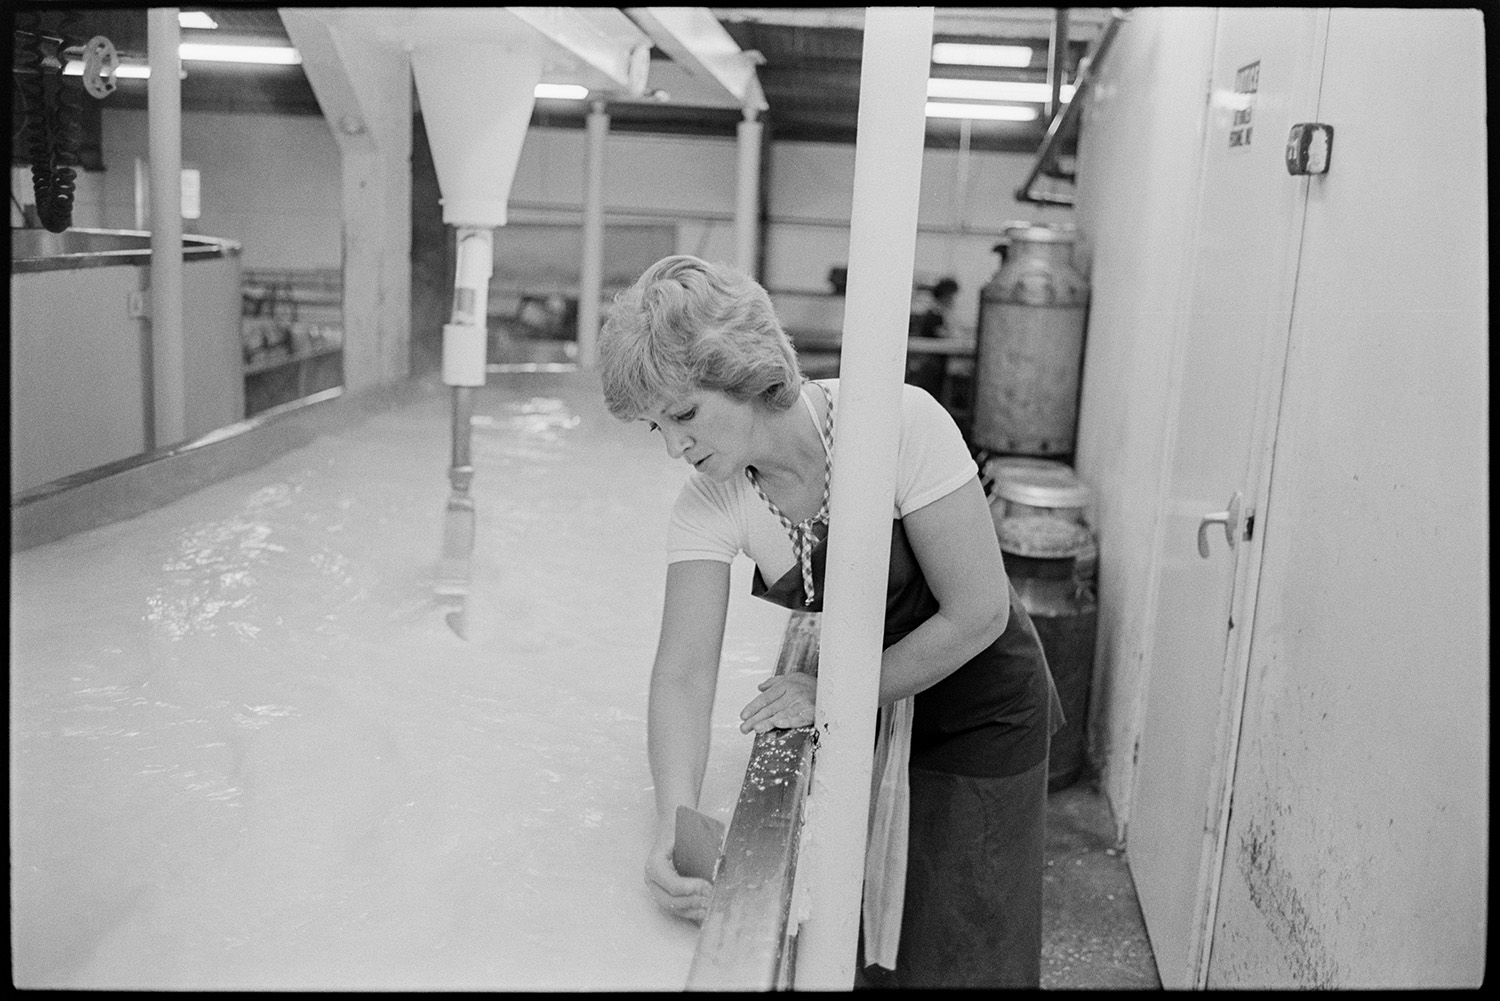 Men and women working in cheese factory, mixing vats, tea break, weighing machine.
[A woman working with liquid in a vat in the cheese factory at Hawkridge Farm, Chawleigh.]